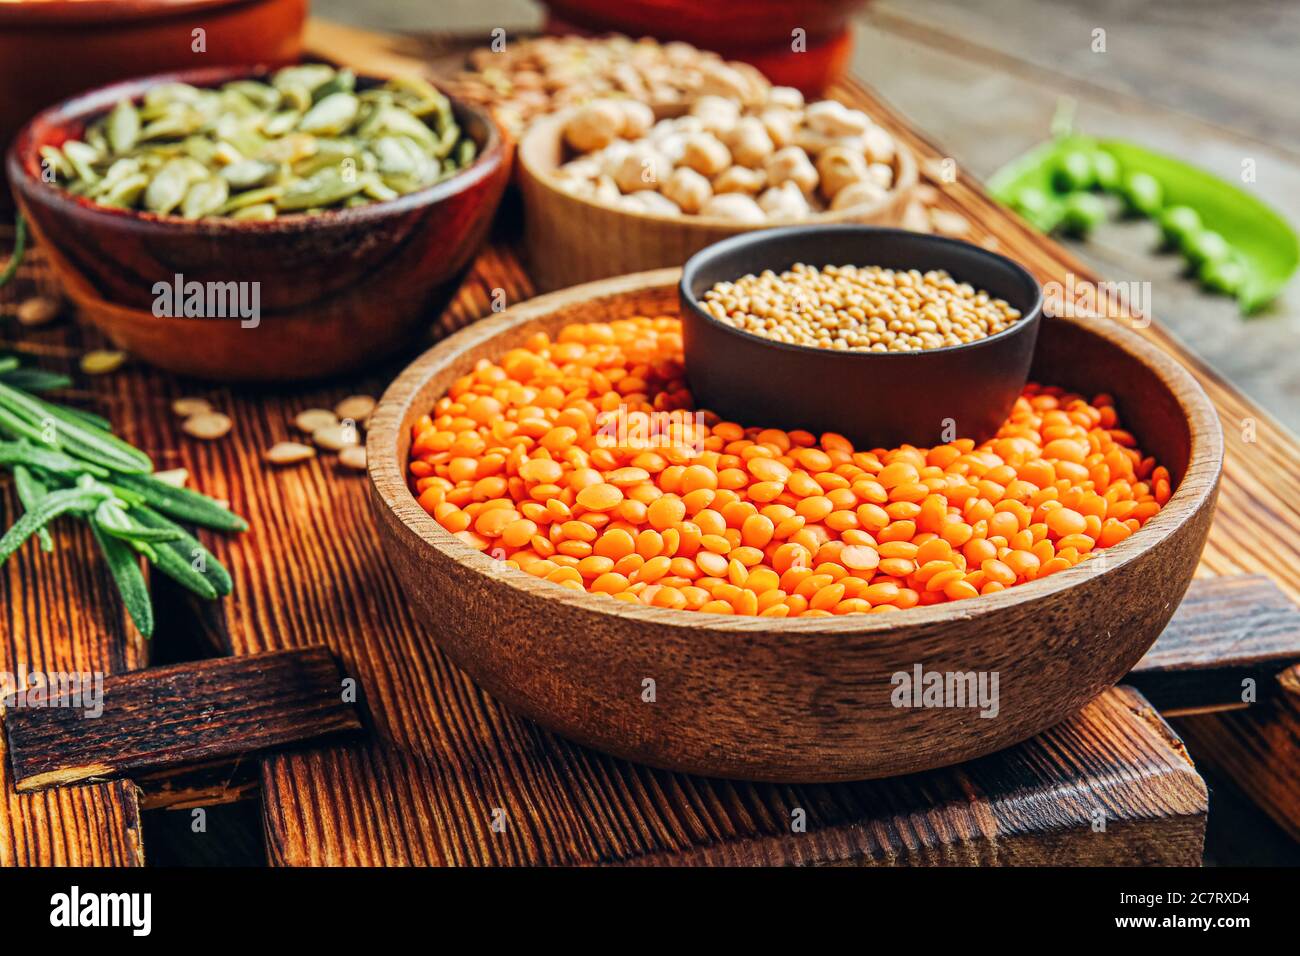 Bowl with lentils and spices on table Stock Photo